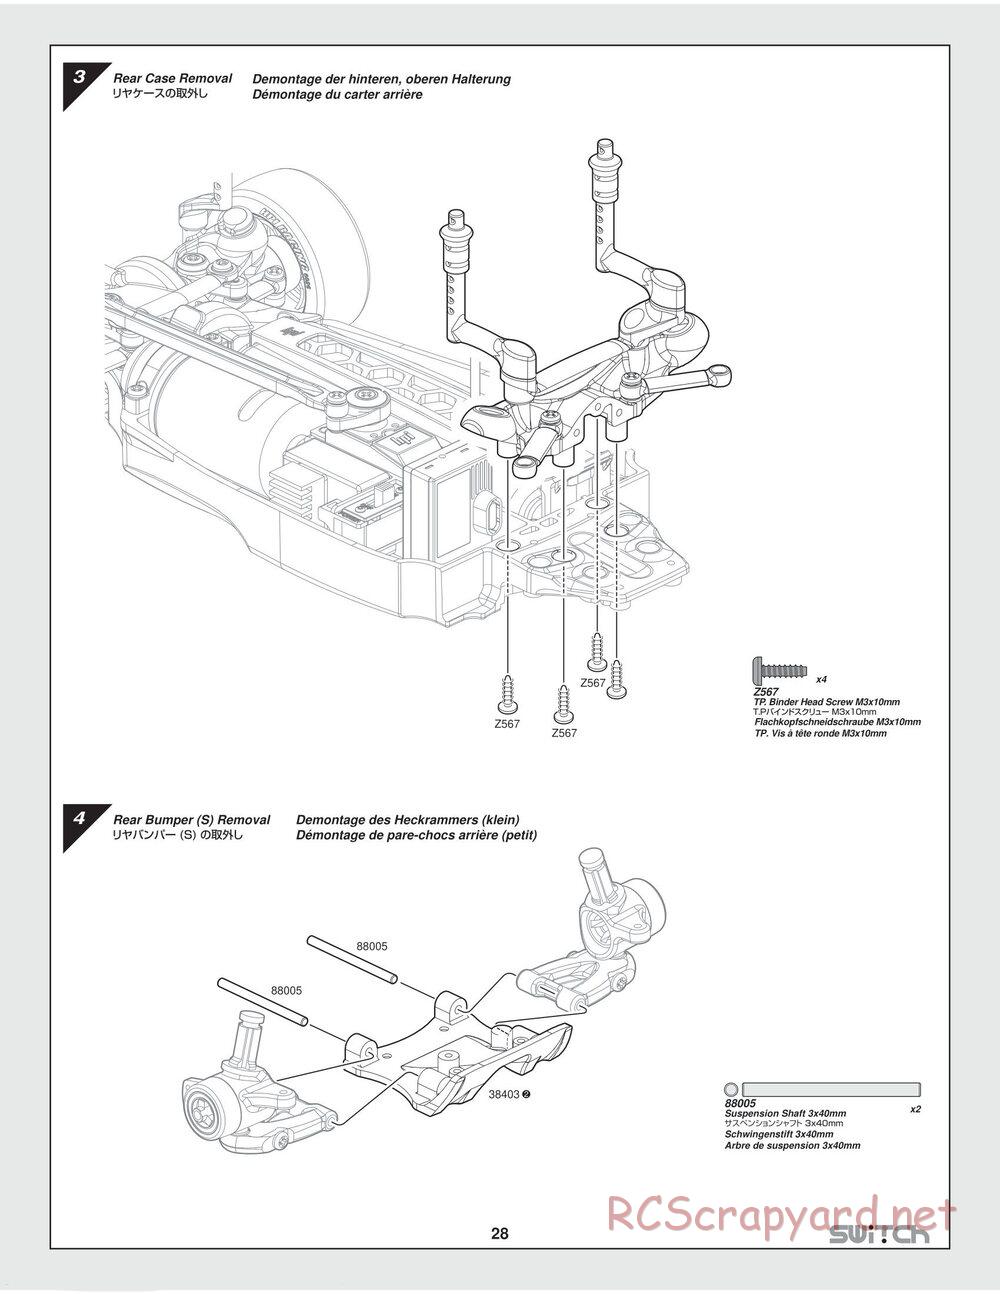 HPI - Switch - Manual - Page 28